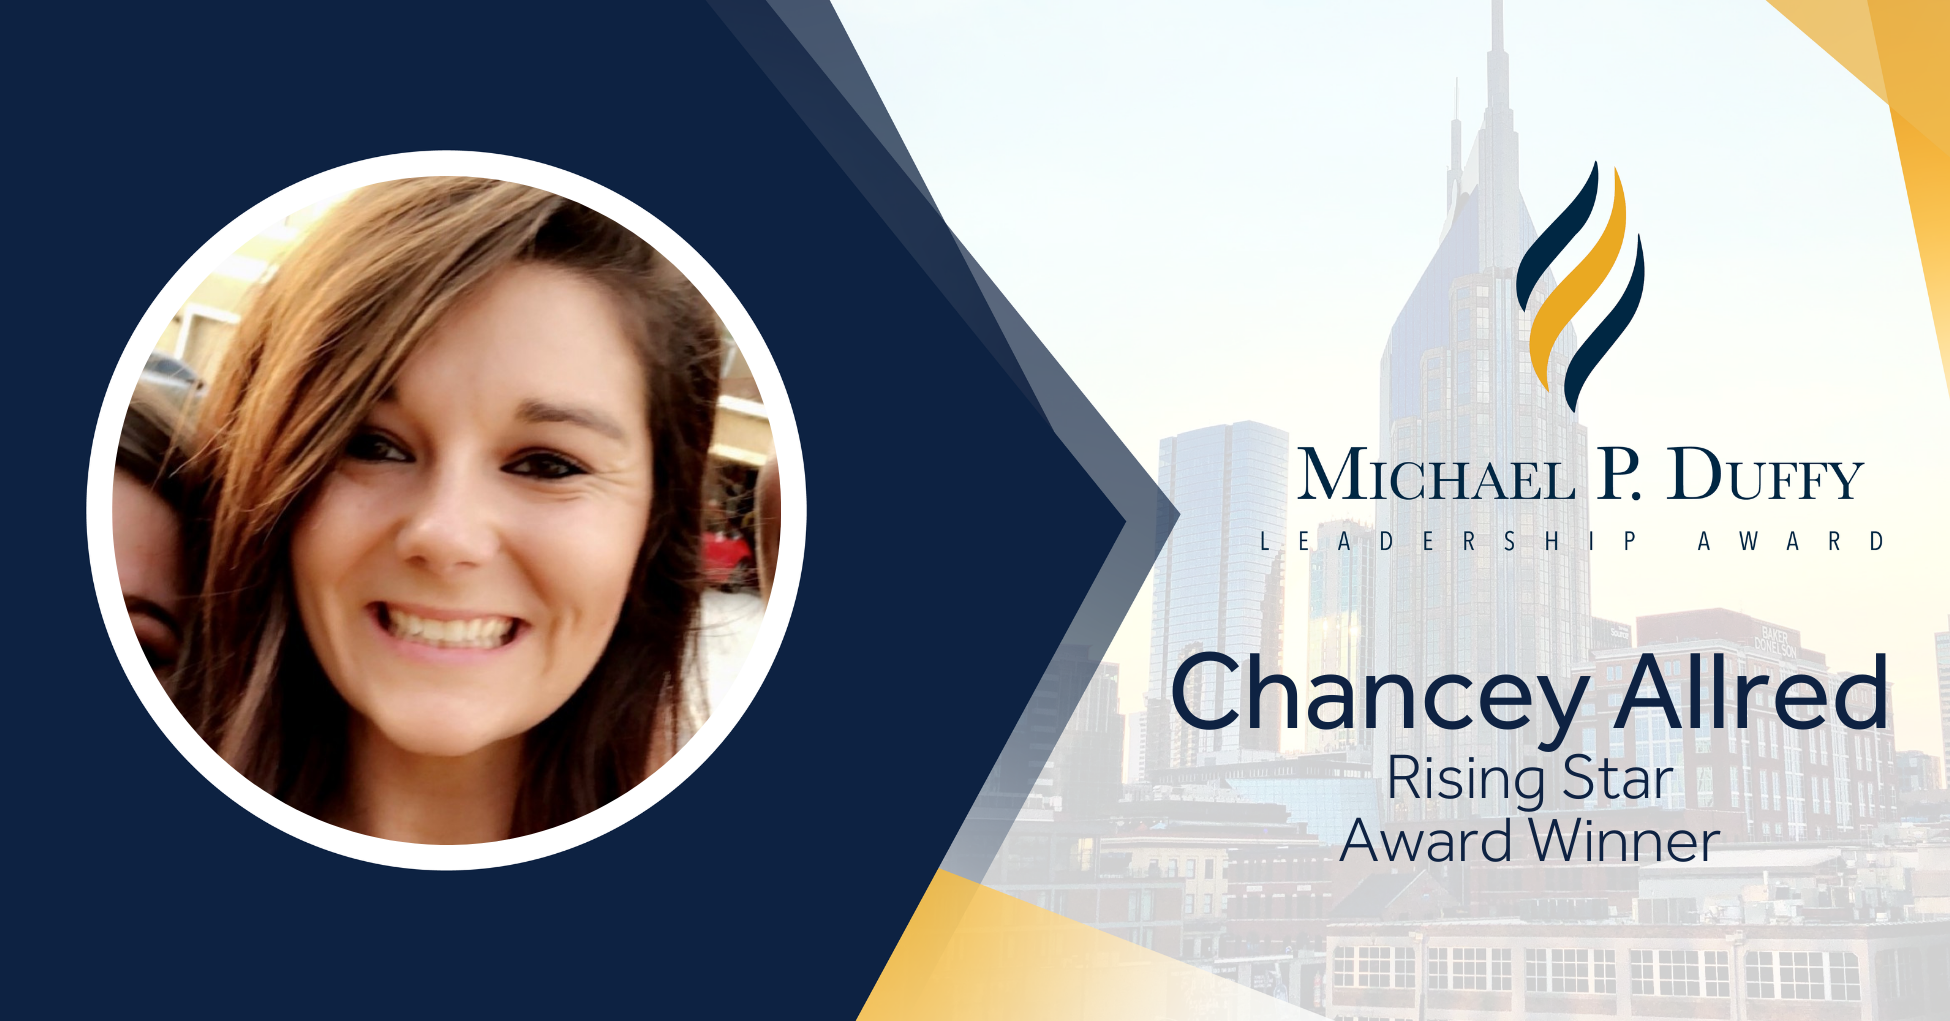 Introducing Chancey Allred, the First-Ever Winner of the Celero Rising Star Award!